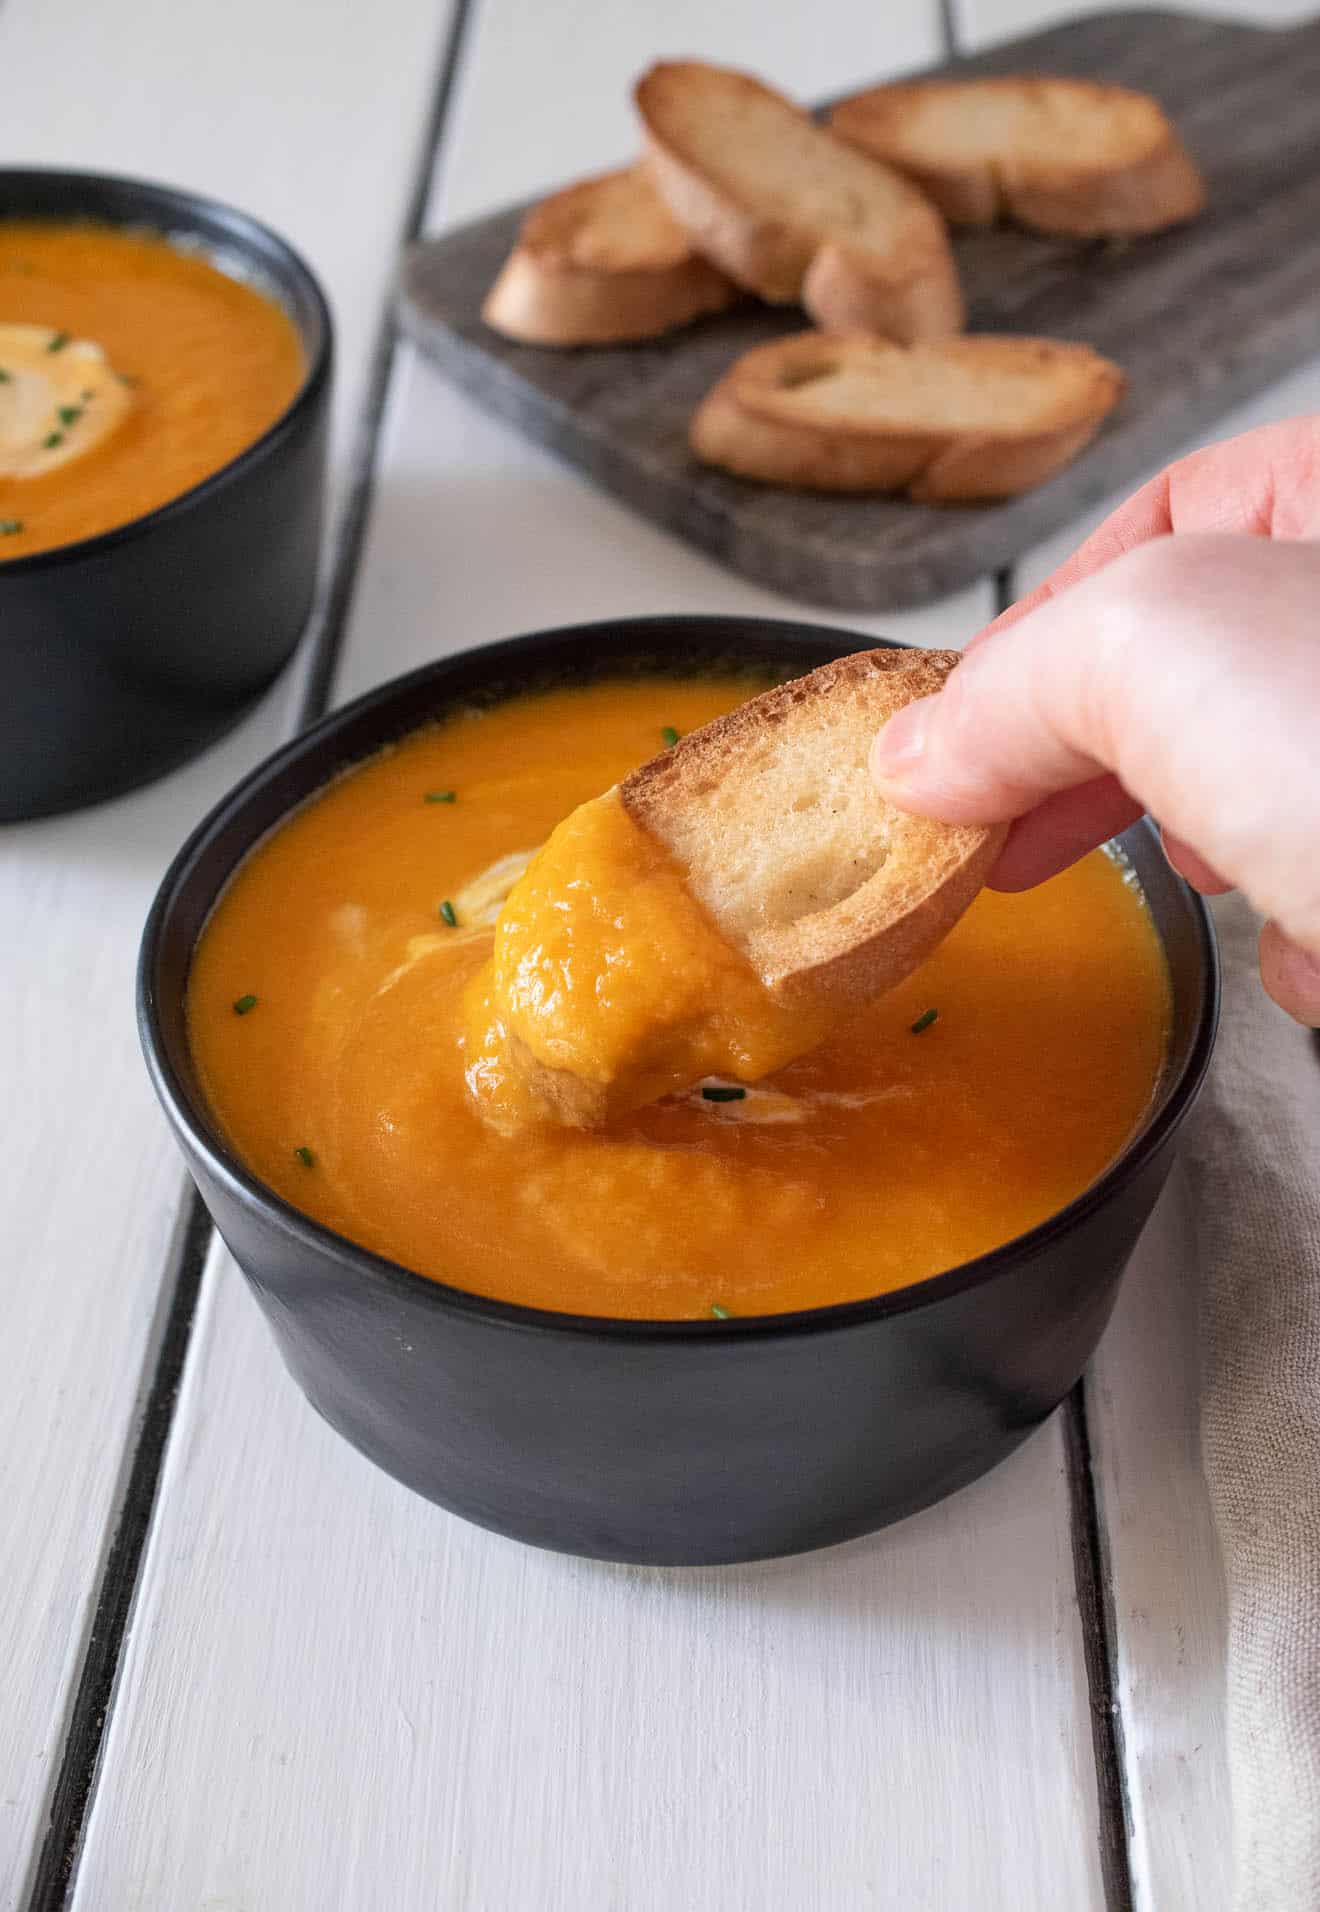 Dipping bread into Roasted Carrot Ginger Soup